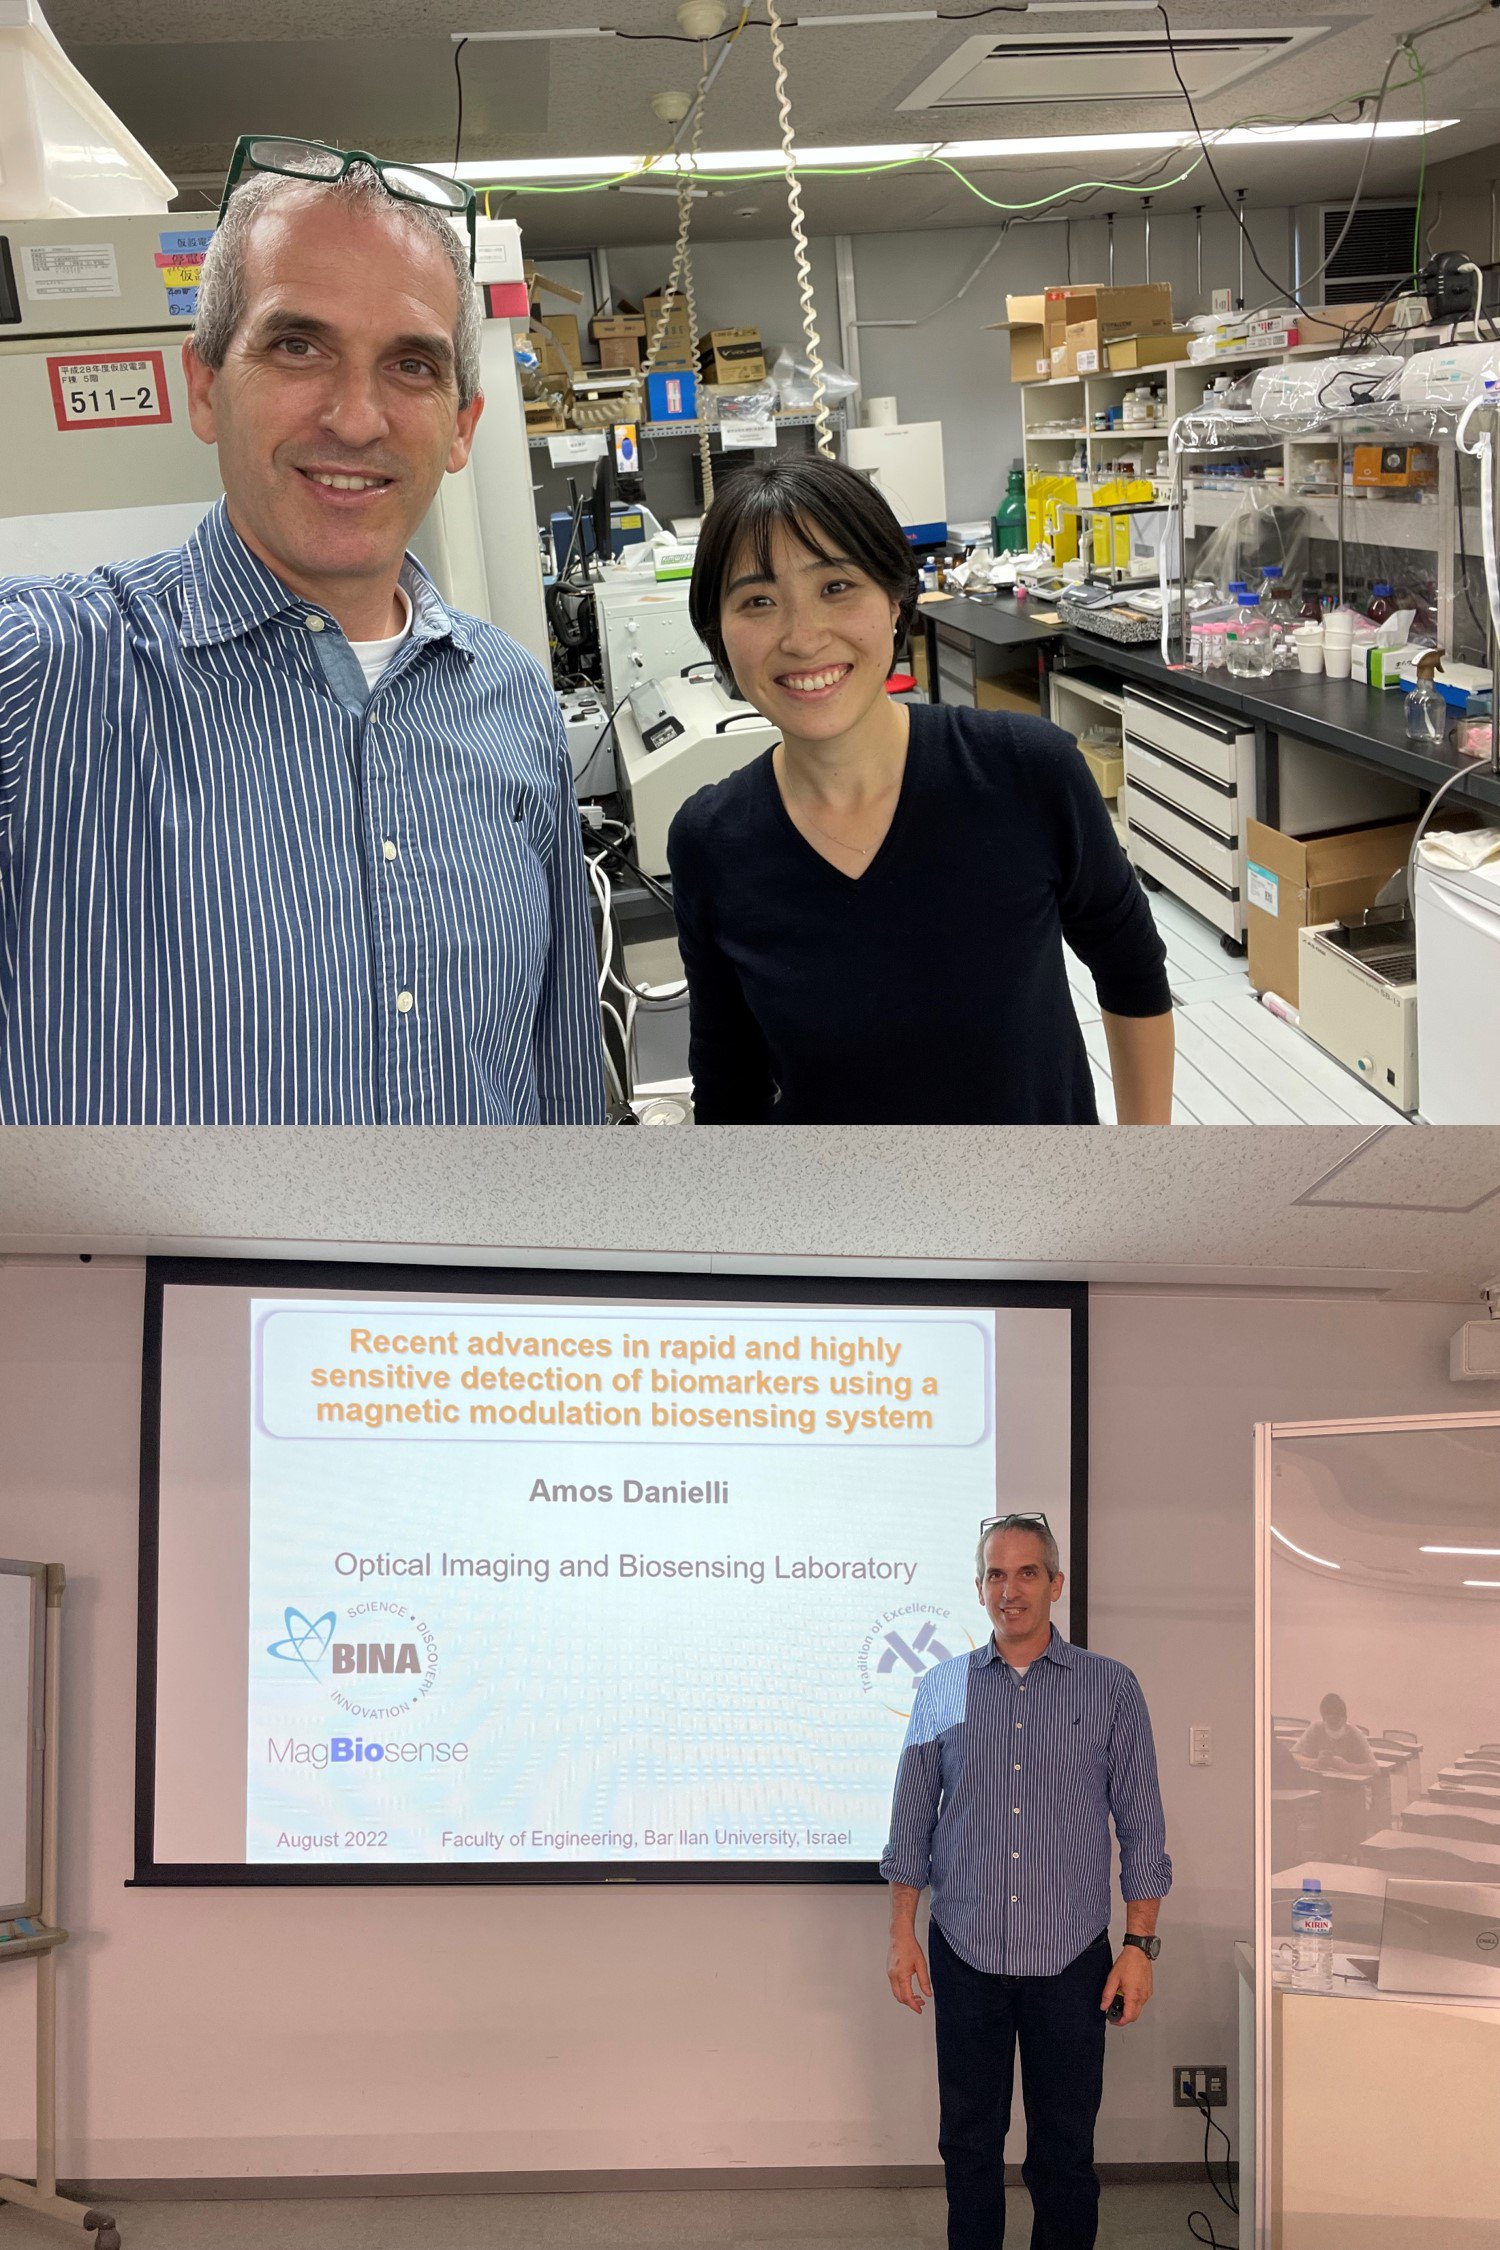 During his visit in Japan, Dr. Amos Danielli met in Tokyo with Dr. Yui Sasaki  from  Prof. Tsuyoshi Minami Lab in the Institute of Industrial Science at the University of Tokyo. Dr. Danielli also gave a talk on "Recent advances in rapid and highly sensitive detection of proteins and specific DNA sequences using a magnetic modulation biosensing system".